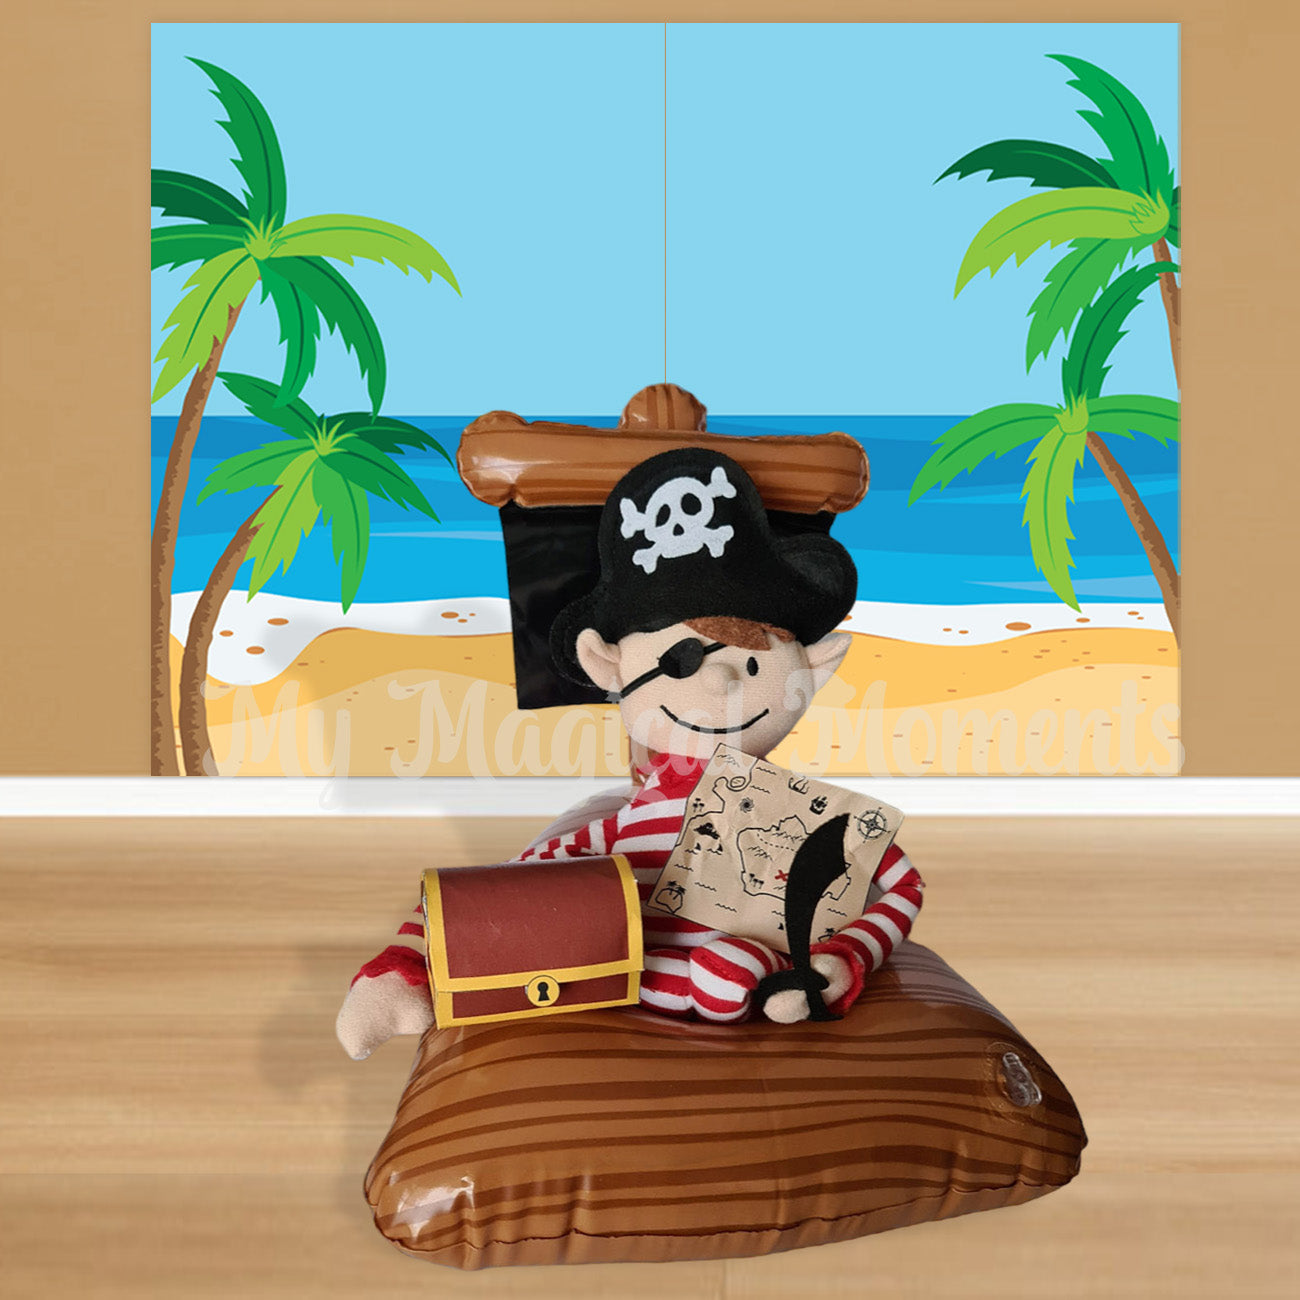 elf in a pirate shop with sword, treasure and map